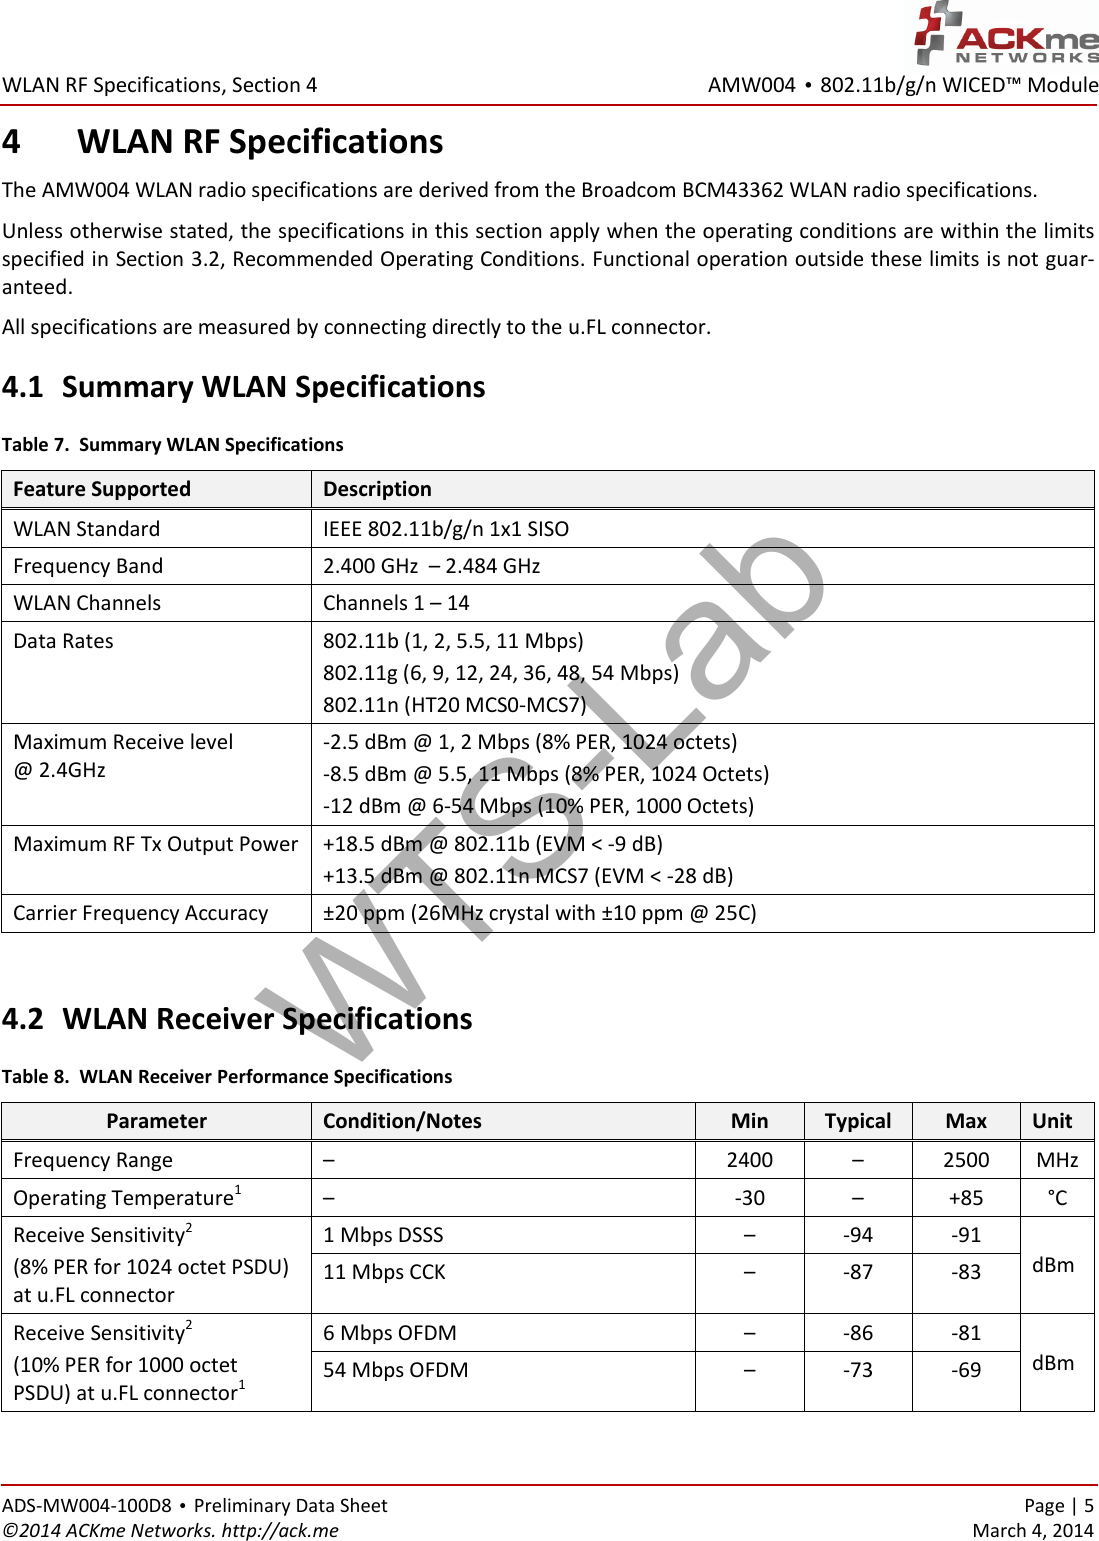 AMW004 • 802.11b/g/n WICED™ Module  WLAN RF Specifications, Section 4 ADS-MW004-100D8 • Preliminary Data Sheet    Page | 5 ©2014 ACKme Networks. http://ack.me    March 4, 2014 4 WLAN RF Specifications The AMW004 WLAN radio specifications are derived from the Broadcom BCM43362 WLAN radio specifications. Unless otherwise stated, the specifications in this section apply when the operating conditions are within the limits specified in Section 3.2, Recommended Operating Conditions. Functional operation outside these limits is not guar-anteed. All specifications are measured by connecting directly to the u.FL connector. 4.1 Summary WLAN Specifications Table 7.  Summary WLAN Specifications Feature Supported Description WLAN Standard IEEE 802.11b/g/n 1x1 SISO Frequency Band 2.400 GHz  – 2.484 GHz WLAN Channels Channels 1 – 14 Data Rates 802.11b (1, 2, 5.5, 11 Mbps) 802.11g (6, 9, 12, 24, 36, 48, 54 Mbps) 802.11n (HT20 MCS0-MCS7) Maximum Receive level  @ 2.4GHz -2.5 dBm @ 1, 2 Mbps (8% PER, 1024 octets) -8.5 dBm @ 5.5, 11 Mbps (8% PER, 1024 Octets) -12 dBm @ 6-54 Mbps (10% PER, 1000 Octets) Maximum RF Tx Output Power +18.5 dBm @ 802.11b (EVM &lt; -9 dB) +13.5 dBm @ 802.11n MCS7 (EVM &lt; -28 dB) Carrier Frequency Accuracy ±20 ppm (26MHz crystal with ±10 ppm @ 25C)  4.2 WLAN Receiver Specifications Table 8.  WLAN Receiver Performance Specifications Parameter Condition/Notes Min Typical Max Unit Frequency Range –  2400 – 2500 MHz Operating Temperature1 – -30 – +85 °C Receive Sensitivity2 (8% PER for 1024 octet PSDU) at u.FL connector 1 Mbps DSSS – -94 -91 dBm 11 Mbps CCK – -87 -83 Receive Sensitivity2 (10% PER for 1000 octet PSDU) at u.FL connector1 6 Mbps OFDM – -86 -81 dBm 54 Mbps OFDM – -73 -69 WTS-Lab